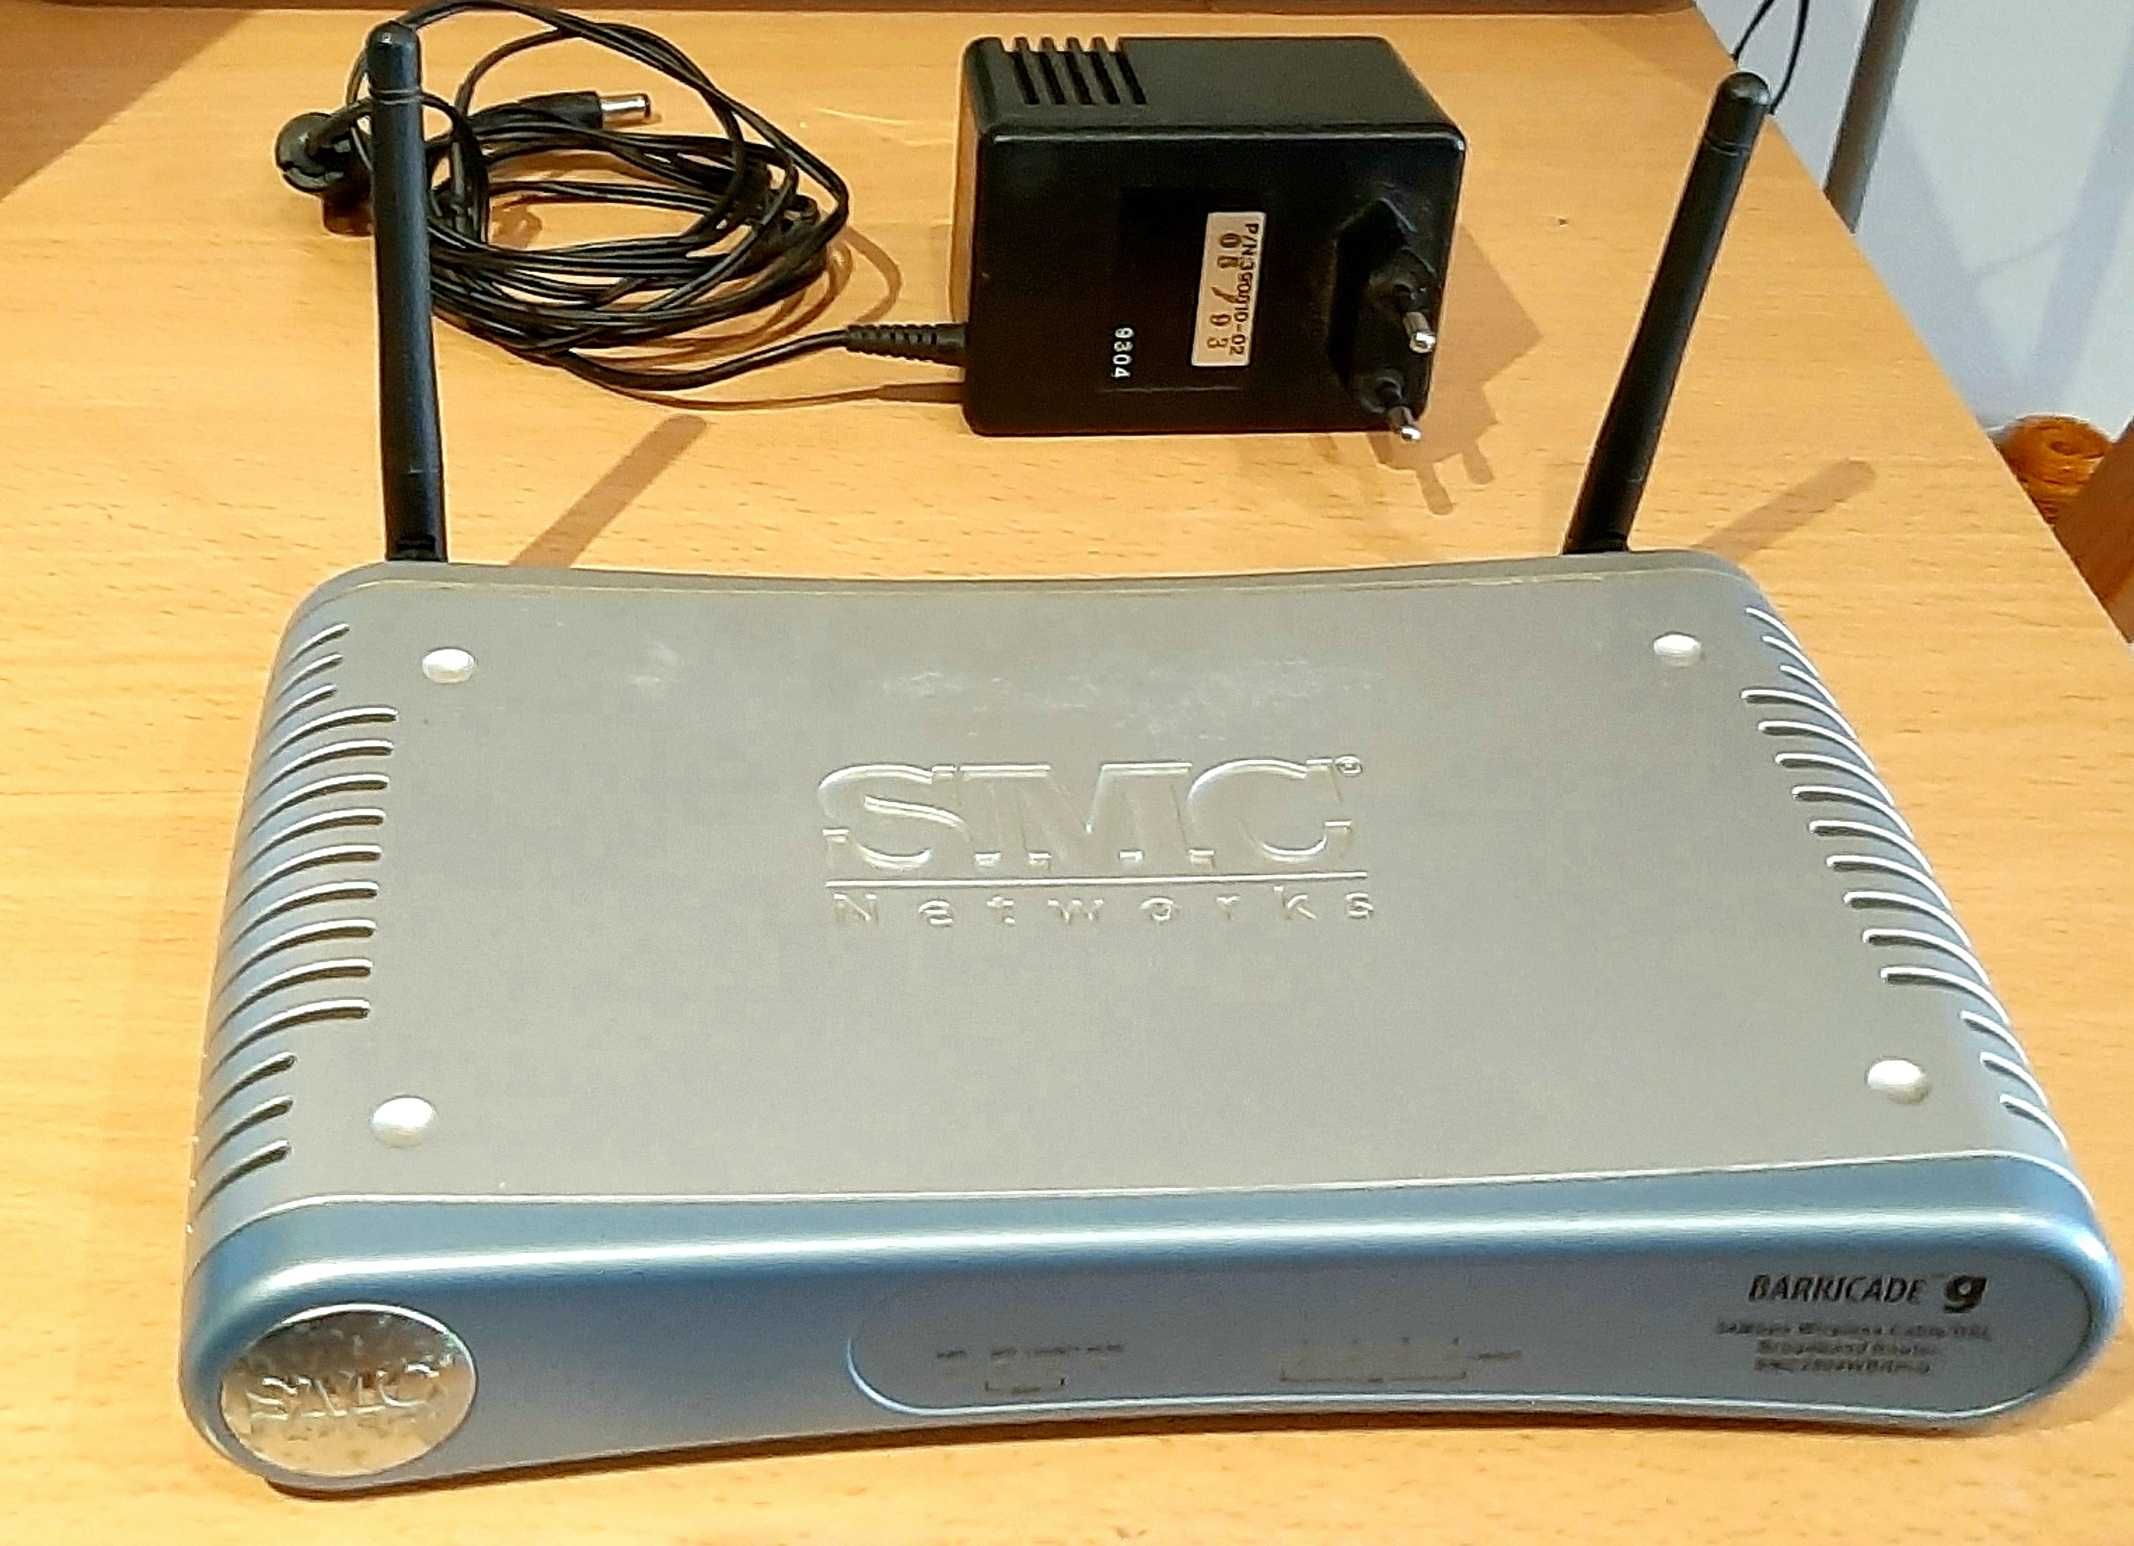 SMC Wirless Router 56 mbps